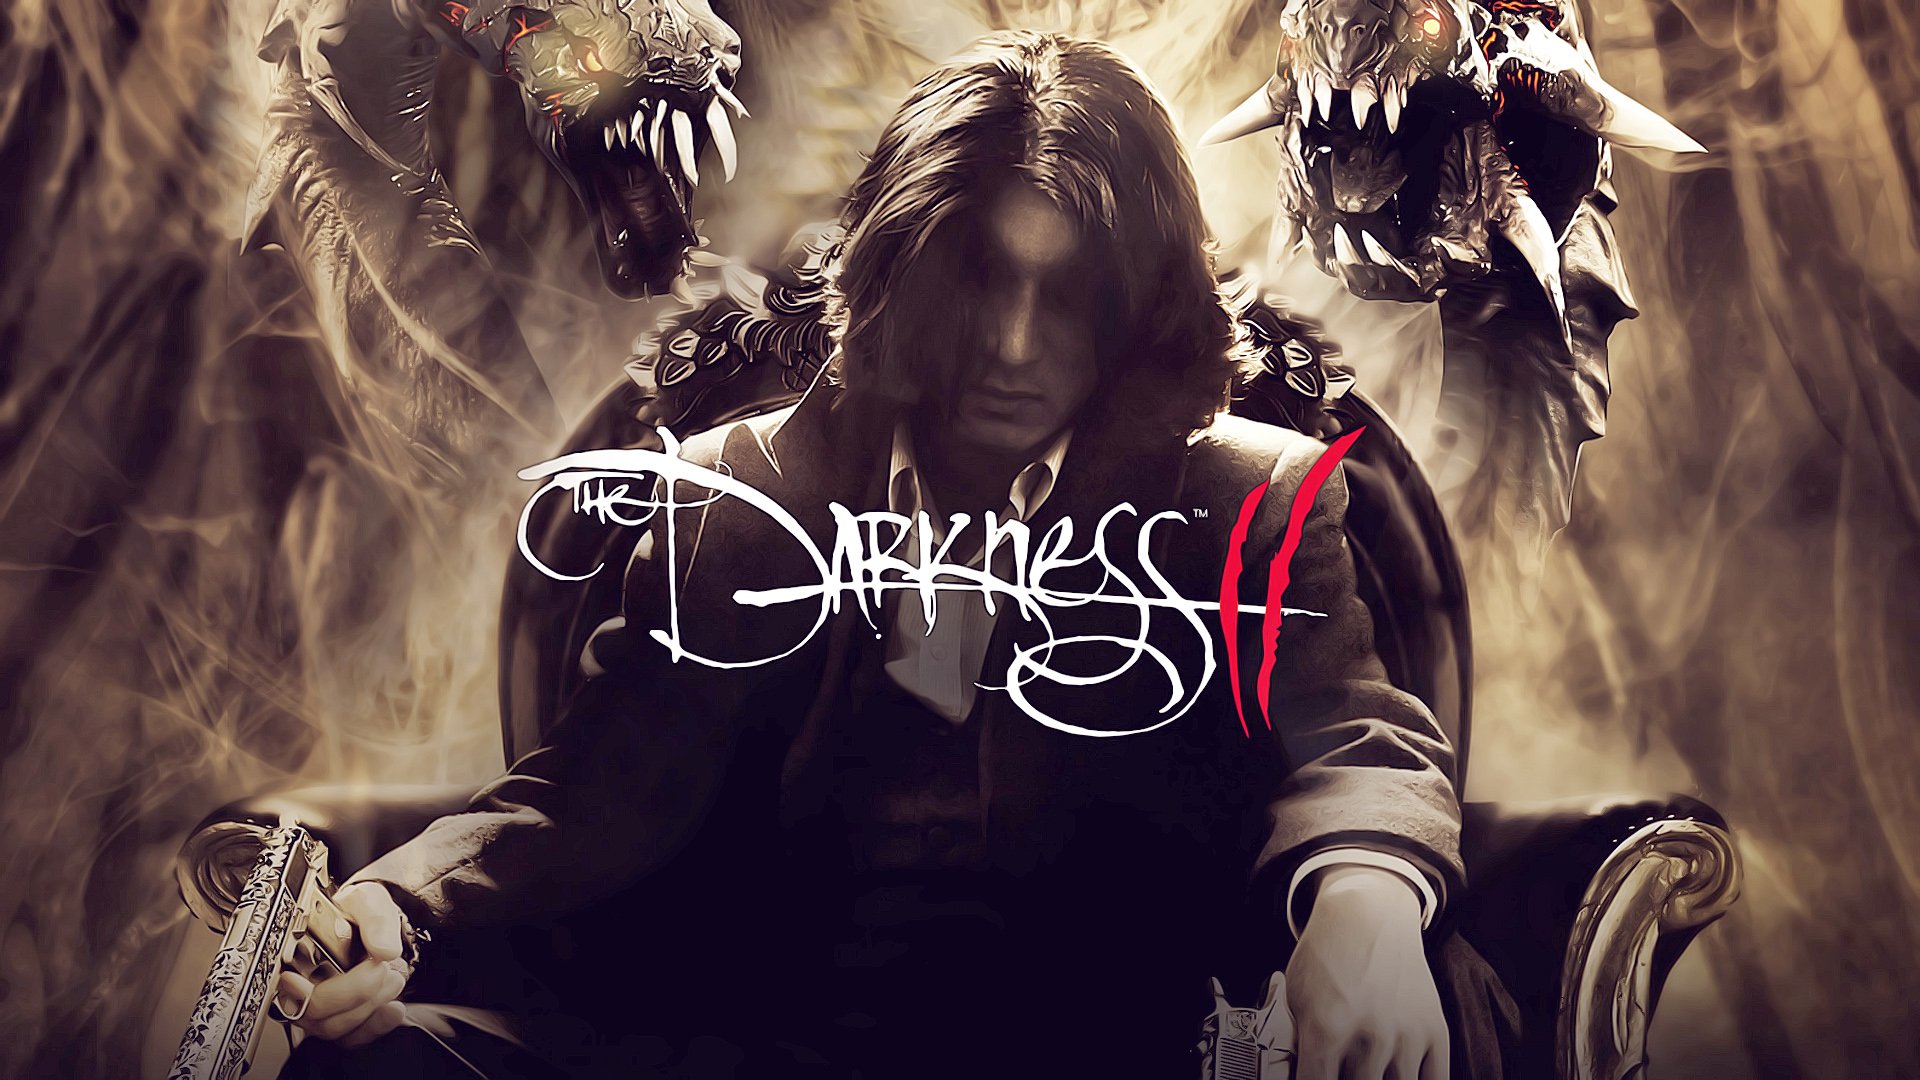 who created the darkness ii